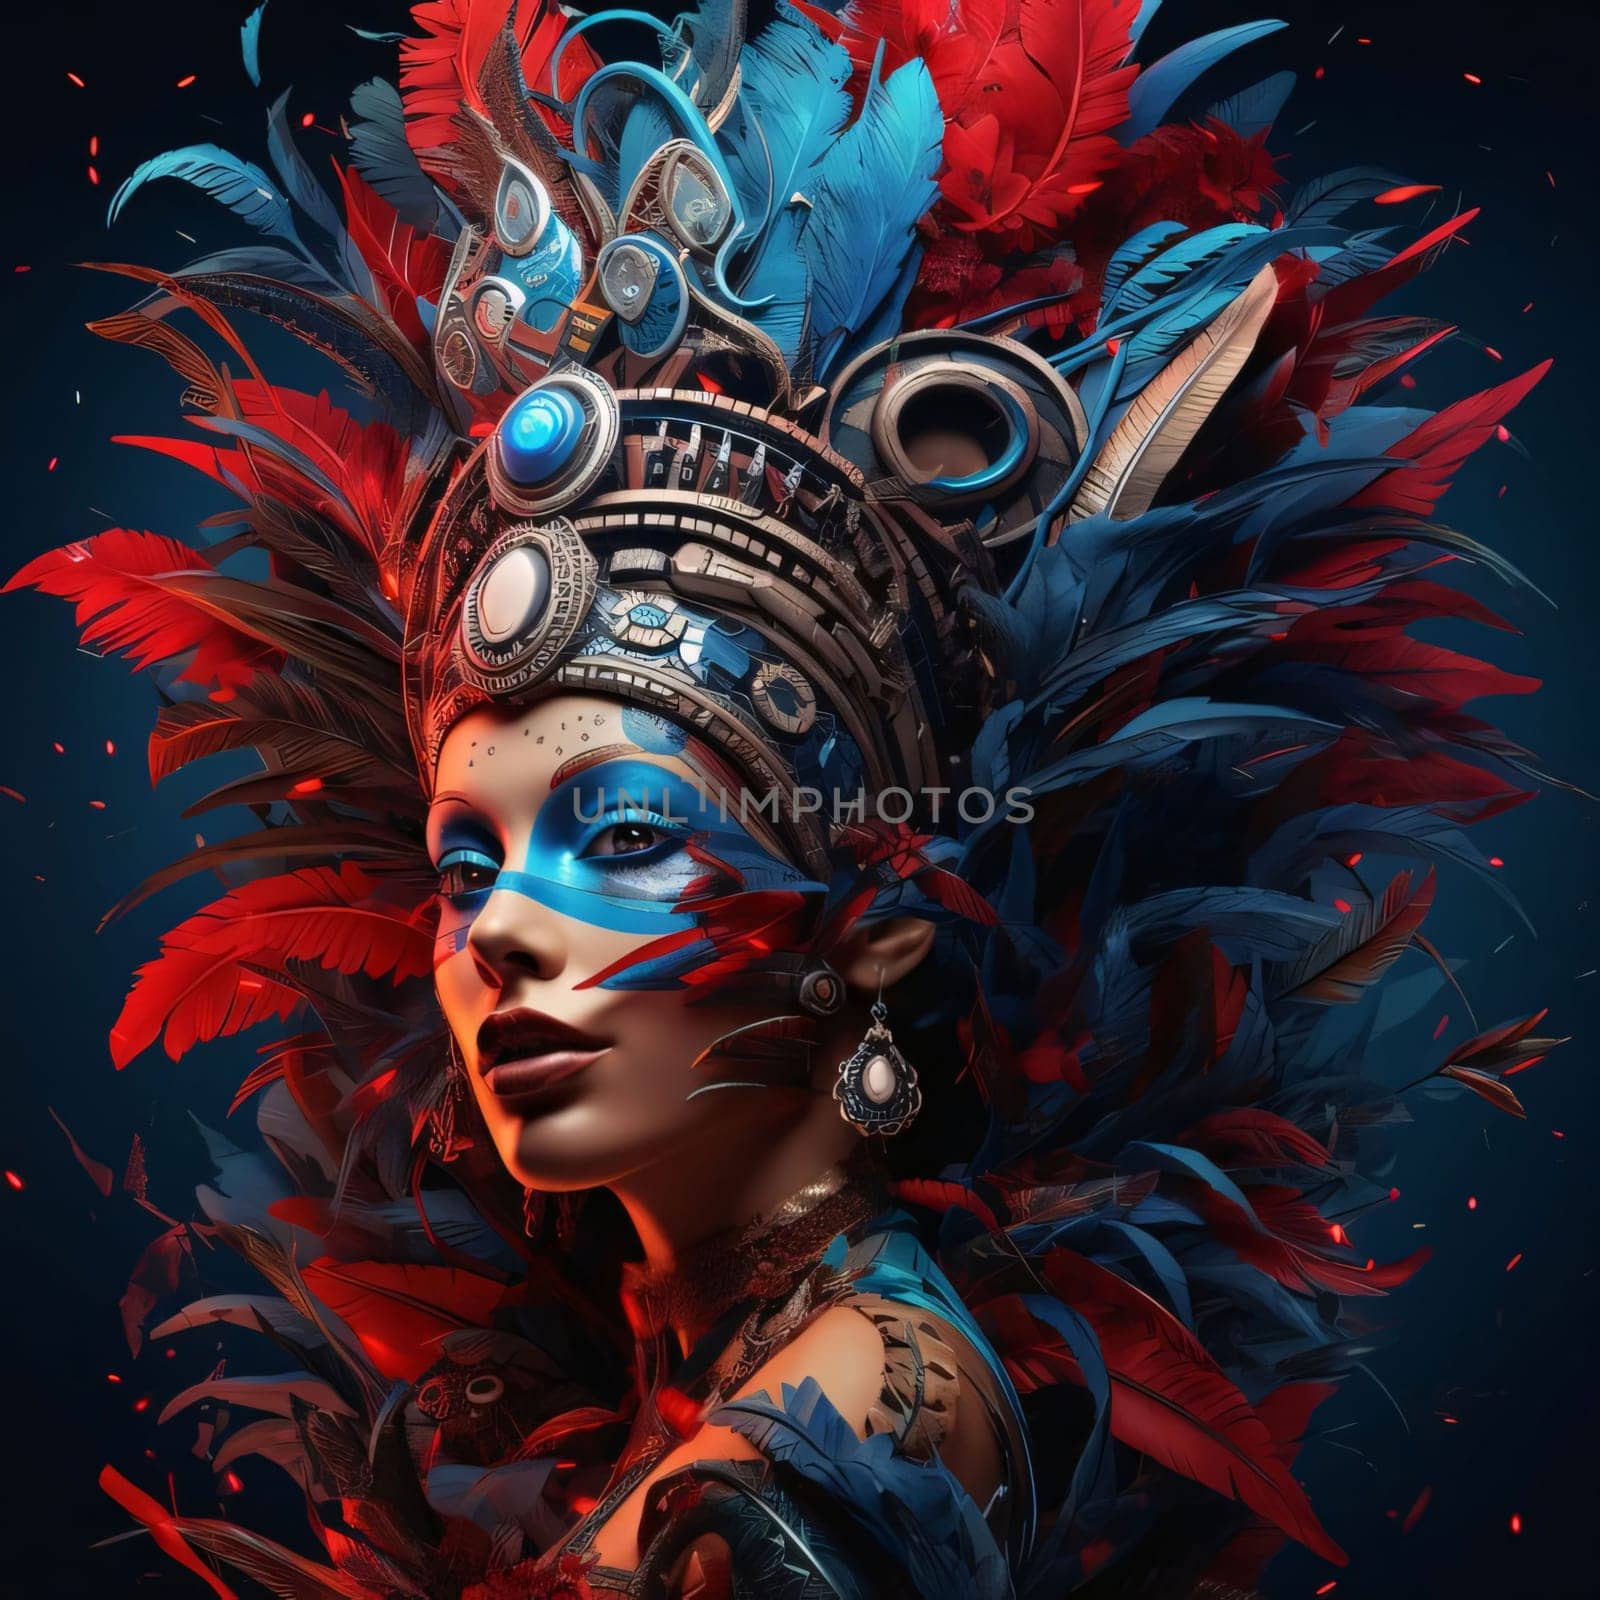 Illustration of a woman in a carnival costume. With Red blue feathers. Carnival outfits, masks and decorations. A time of fun and celebration before the fast.